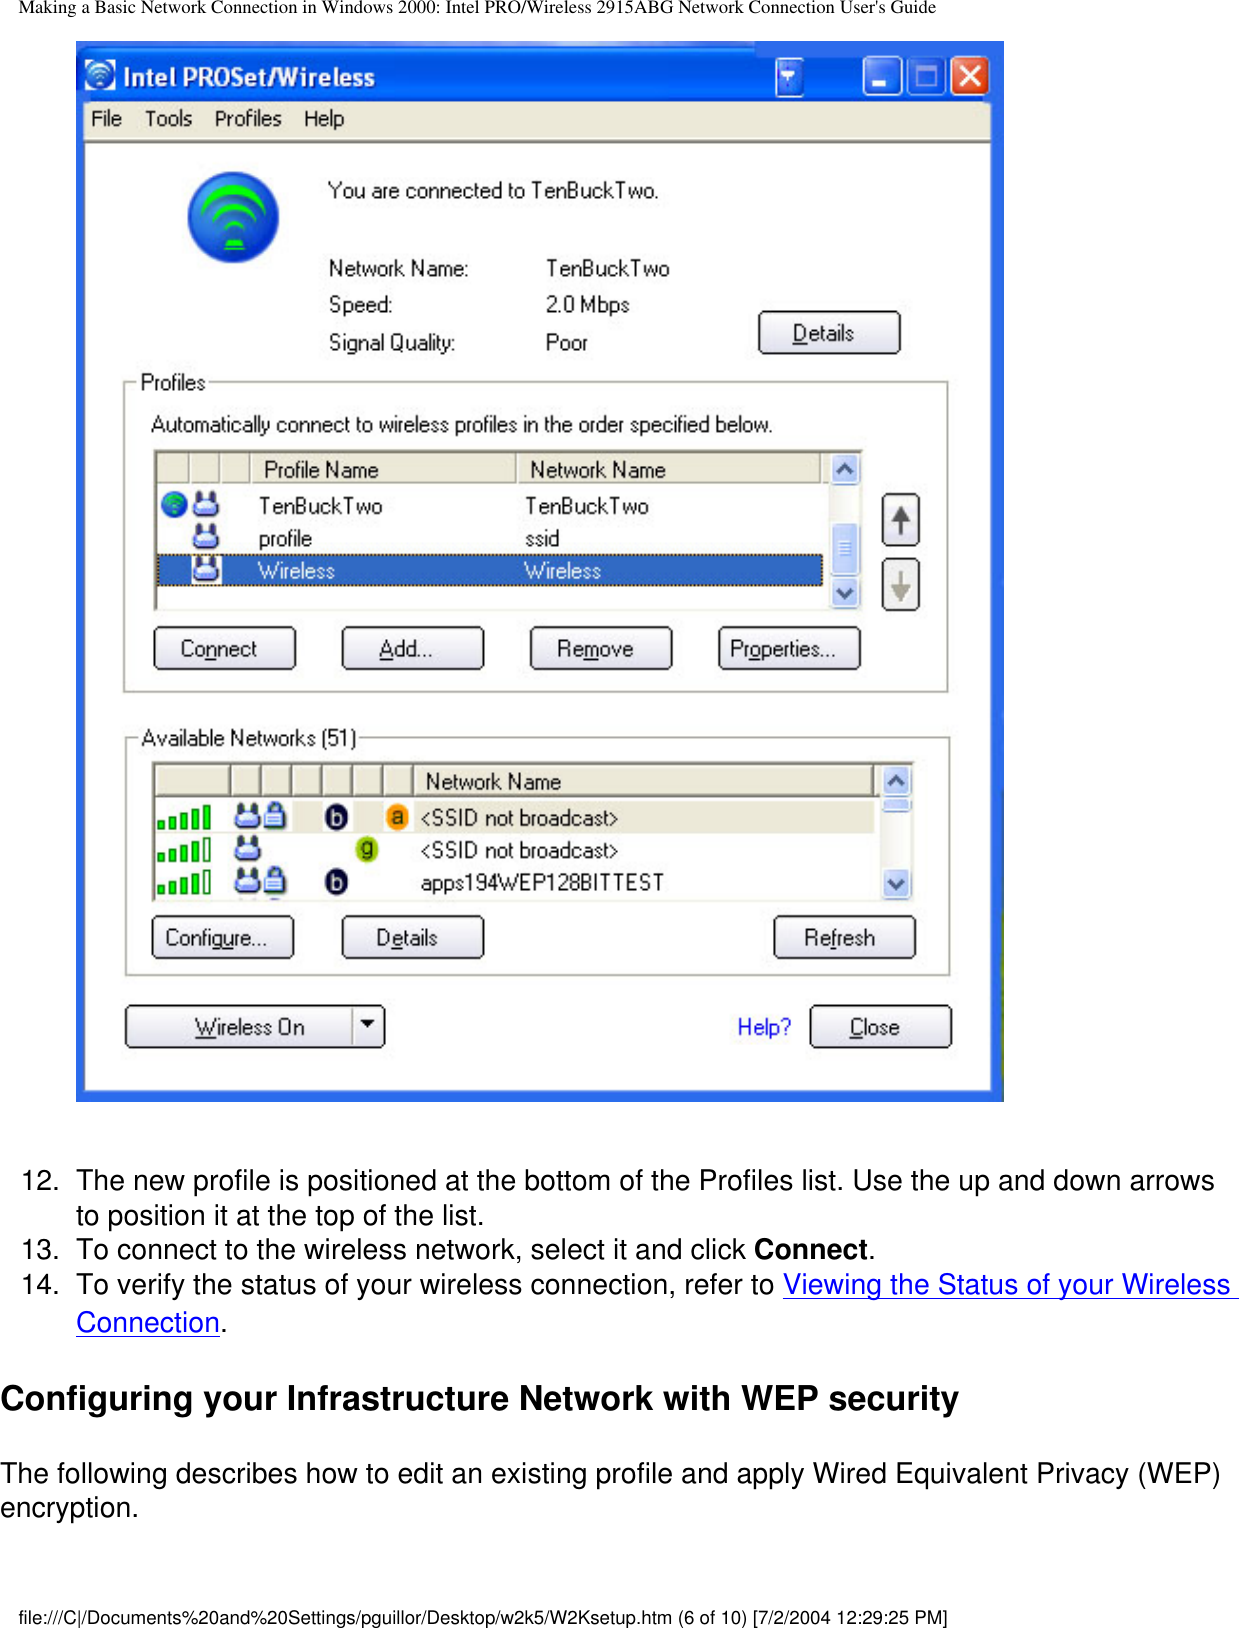 Making a Basic Network Connection in Windows 2000: Intel PRO/Wireless 2915ABG Network Connection User&apos;s Guide12.  The new profile is positioned at the bottom of the Profiles list. Use the up and down arrows to position it at the top of the list. 13.  To connect to the wireless network, select it and click Connect. 14.  To verify the status of your wireless connection, refer to Viewing the Status of your Wireless Connection.Configuring your Infrastructure Network with WEP securityThe following describes how to edit an existing profile and apply Wired Equivalent Privacy (WEP) encryption.file:///C|/Documents%20and%20Settings/pguillor/Desktop/w2k5/W2Ksetup.htm (6 of 10) [7/2/2004 12:29:25 PM]